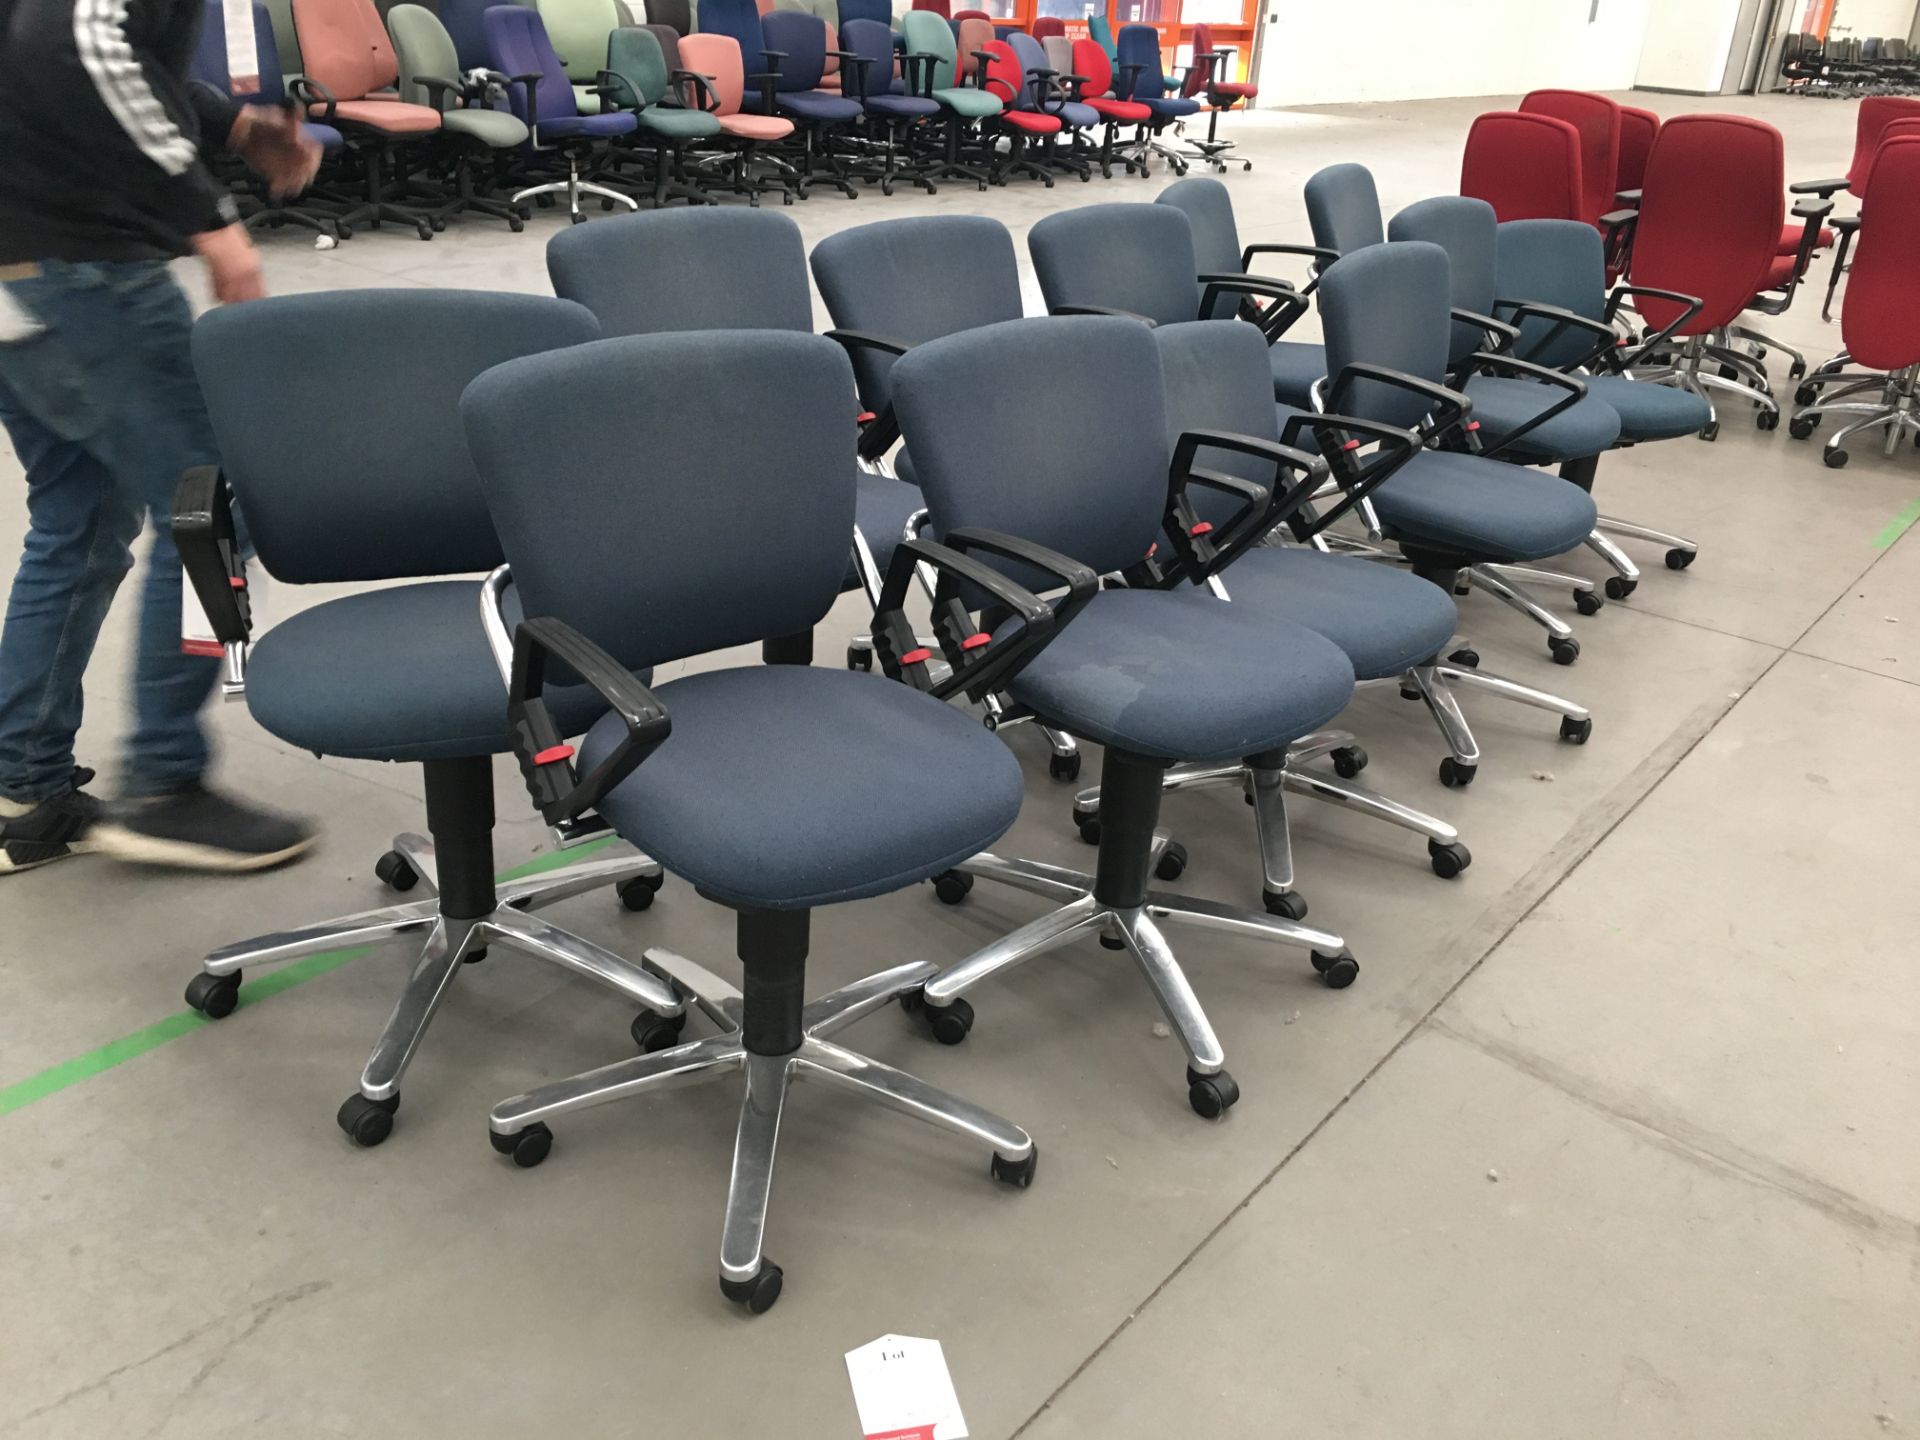 12 x Akzenta height adjustable typist chairs with arms